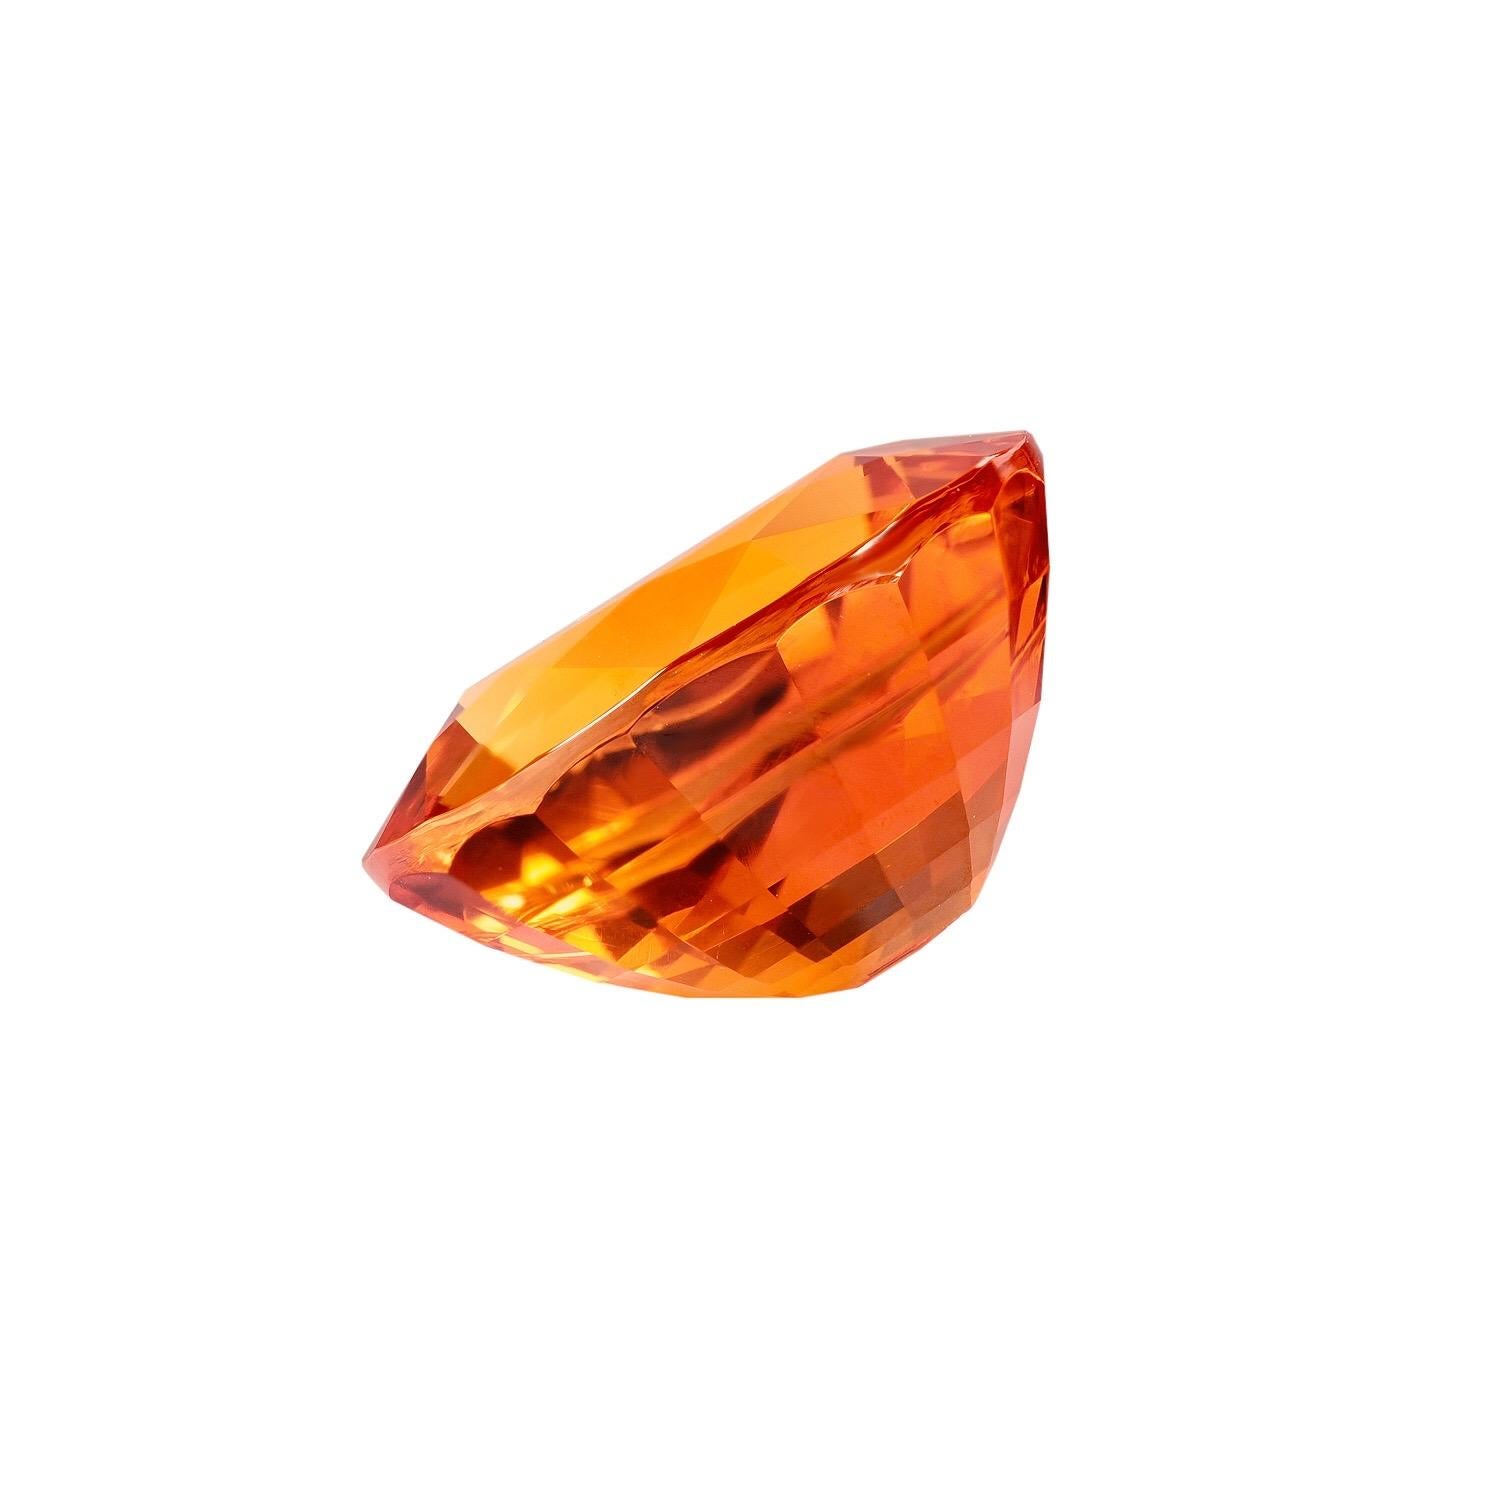 Ultra fine and exclusive, GIA certified, 13.54 carat Mandarin Garnet (Spessartine Garnet) oval gem offered loose to a passionate gemstone collector.
The G.I.A certificate is attached to the image selection for your convenience.
Returns are accepted